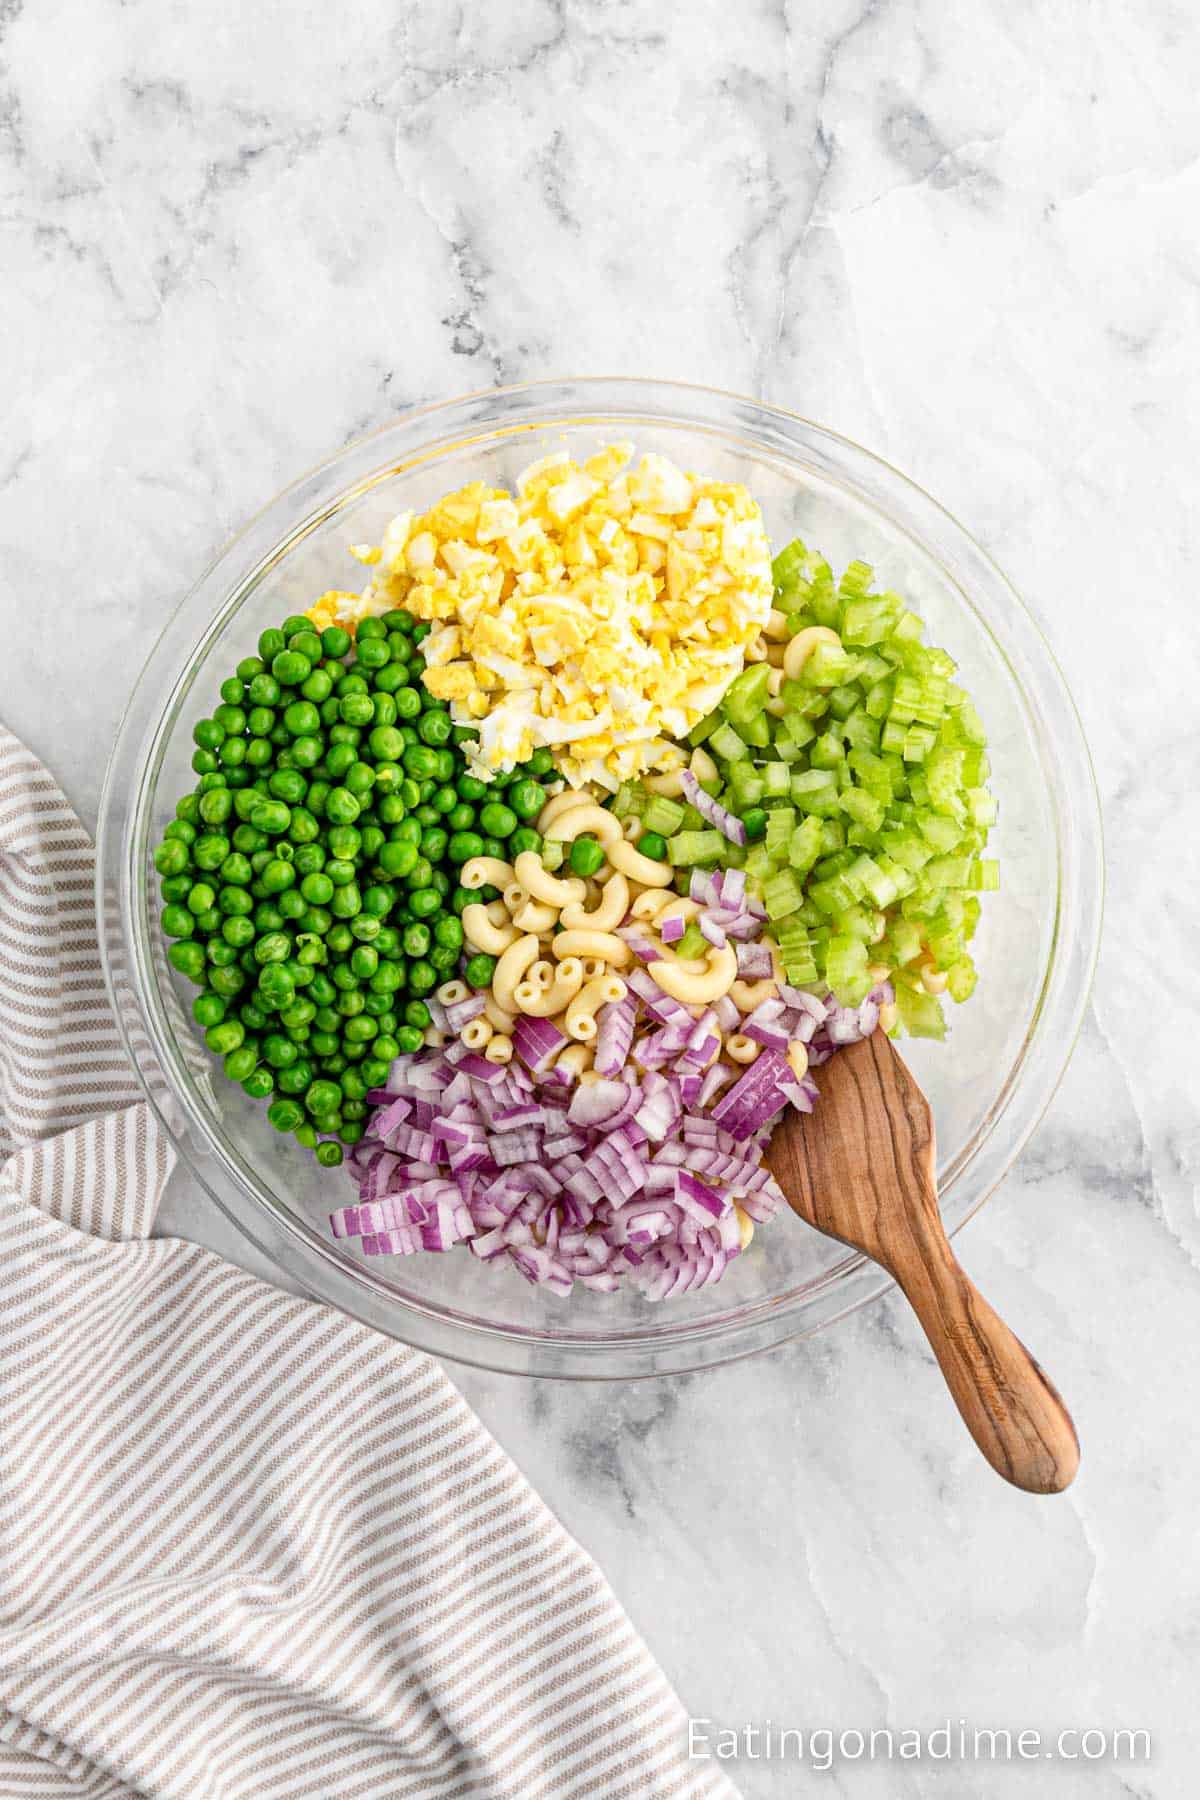 Peas, celery, onion, eggs and pasta in a bowl with a wooden spoon